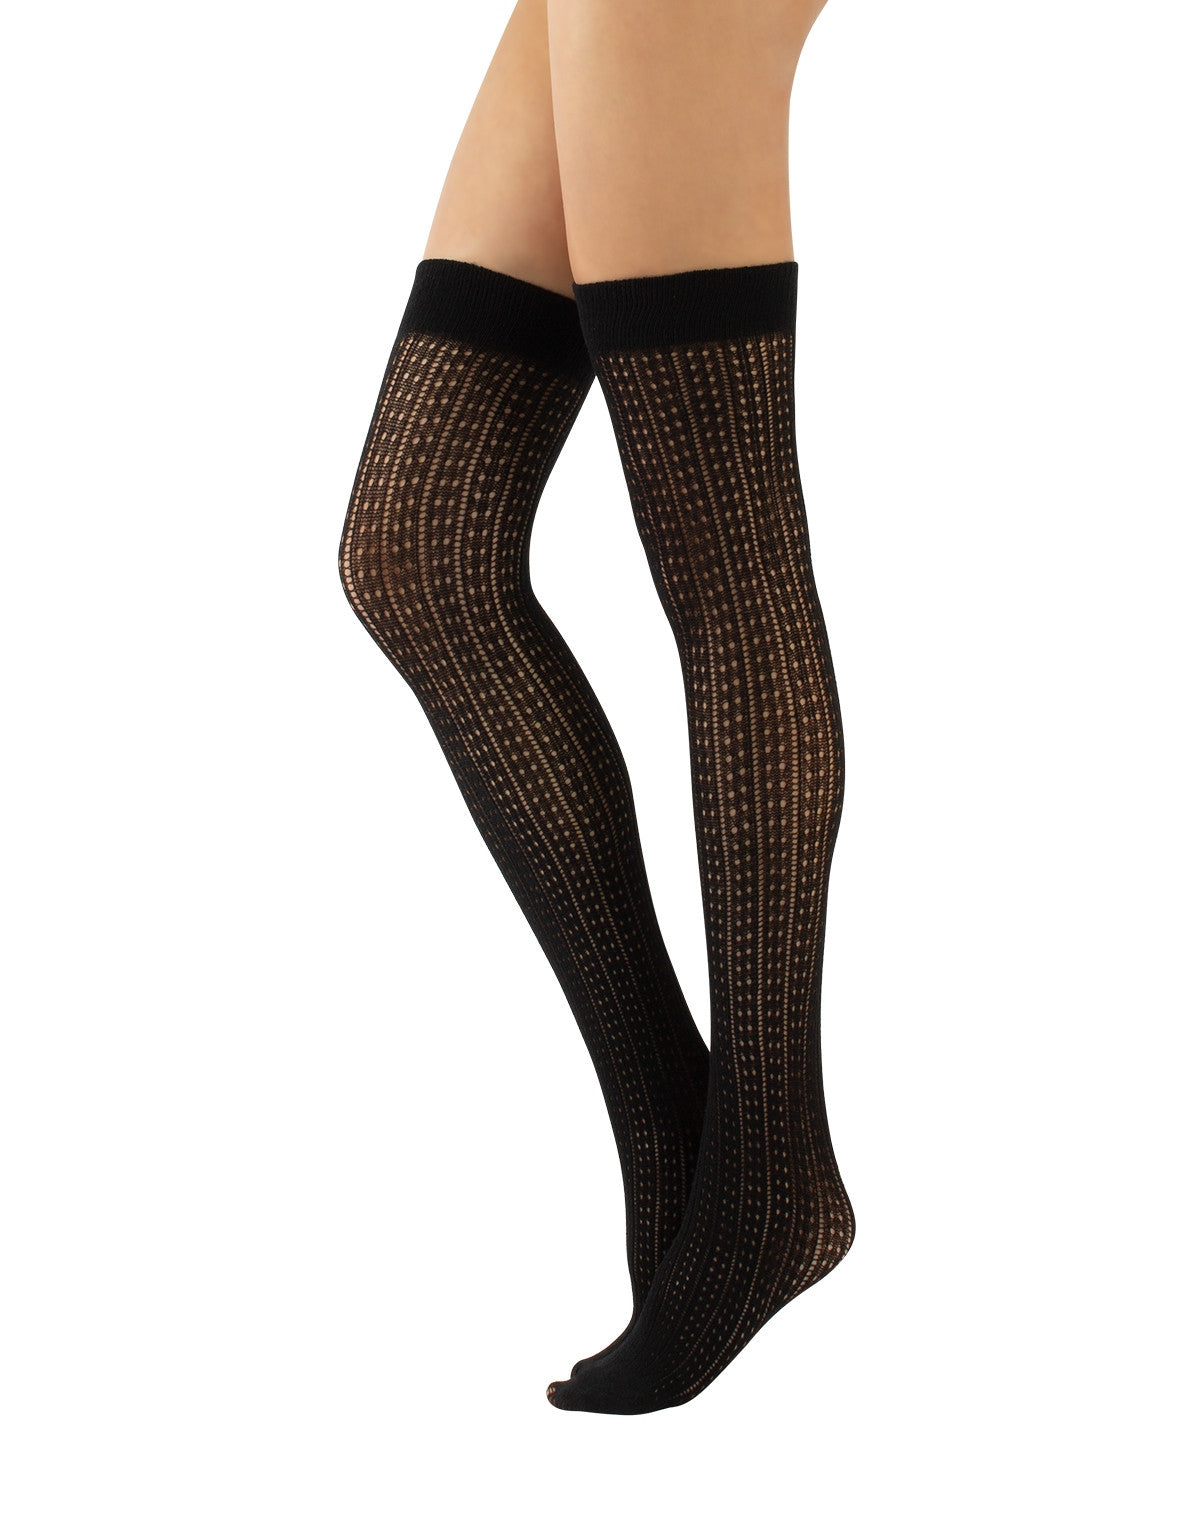 Calzitaly Geometric Over-Knee Socks - Knitted black over the knee socks with an openwork spotted vertical rib style pattern, plain elasticated cuff and plain toe.